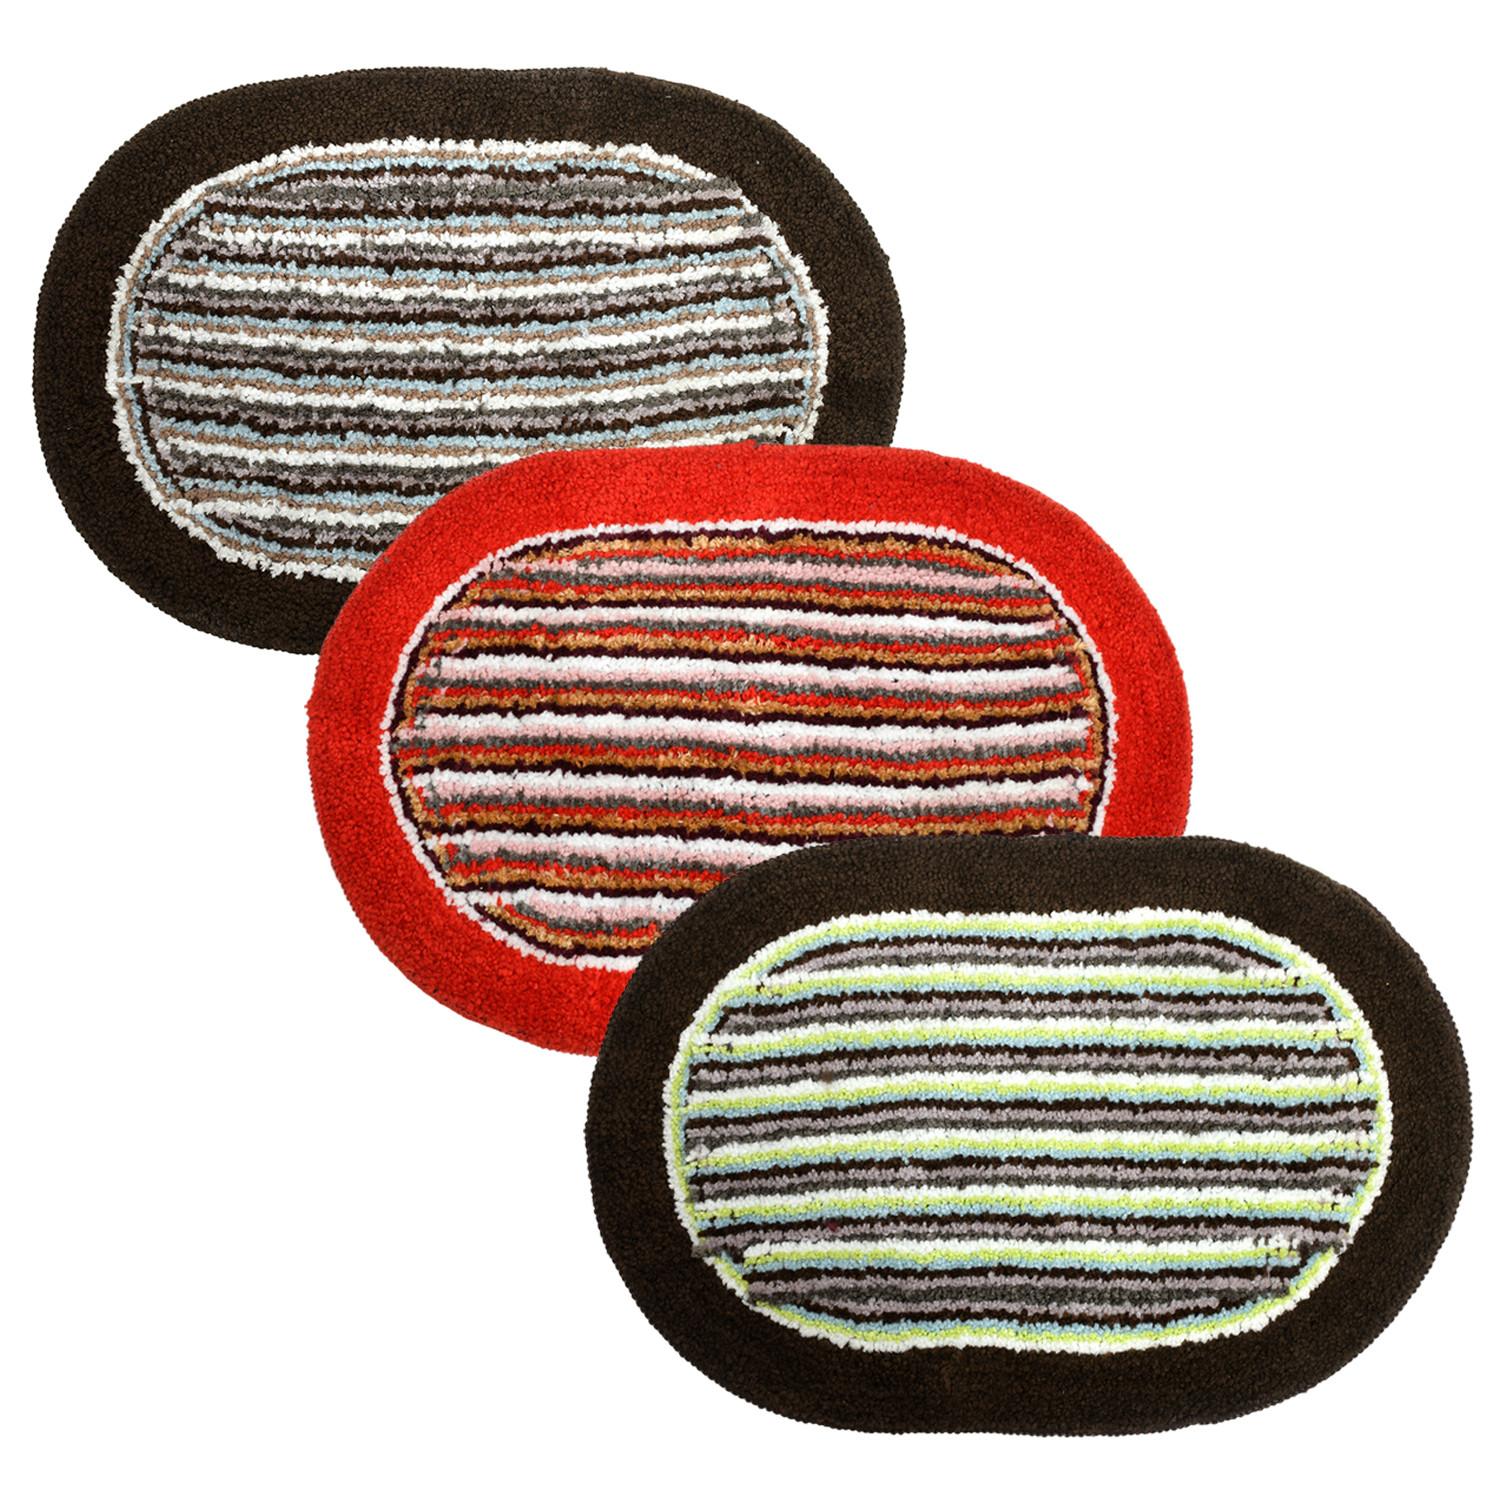 Kuber Industries Strips Design Soft Cotton Doormat Dirts Trapper Mat Bath Door Mat Machine Washable For Porch/Kitchen/Bathroom/Laundry Room- Pack of 3 (Brown & Red & Brown & Green)